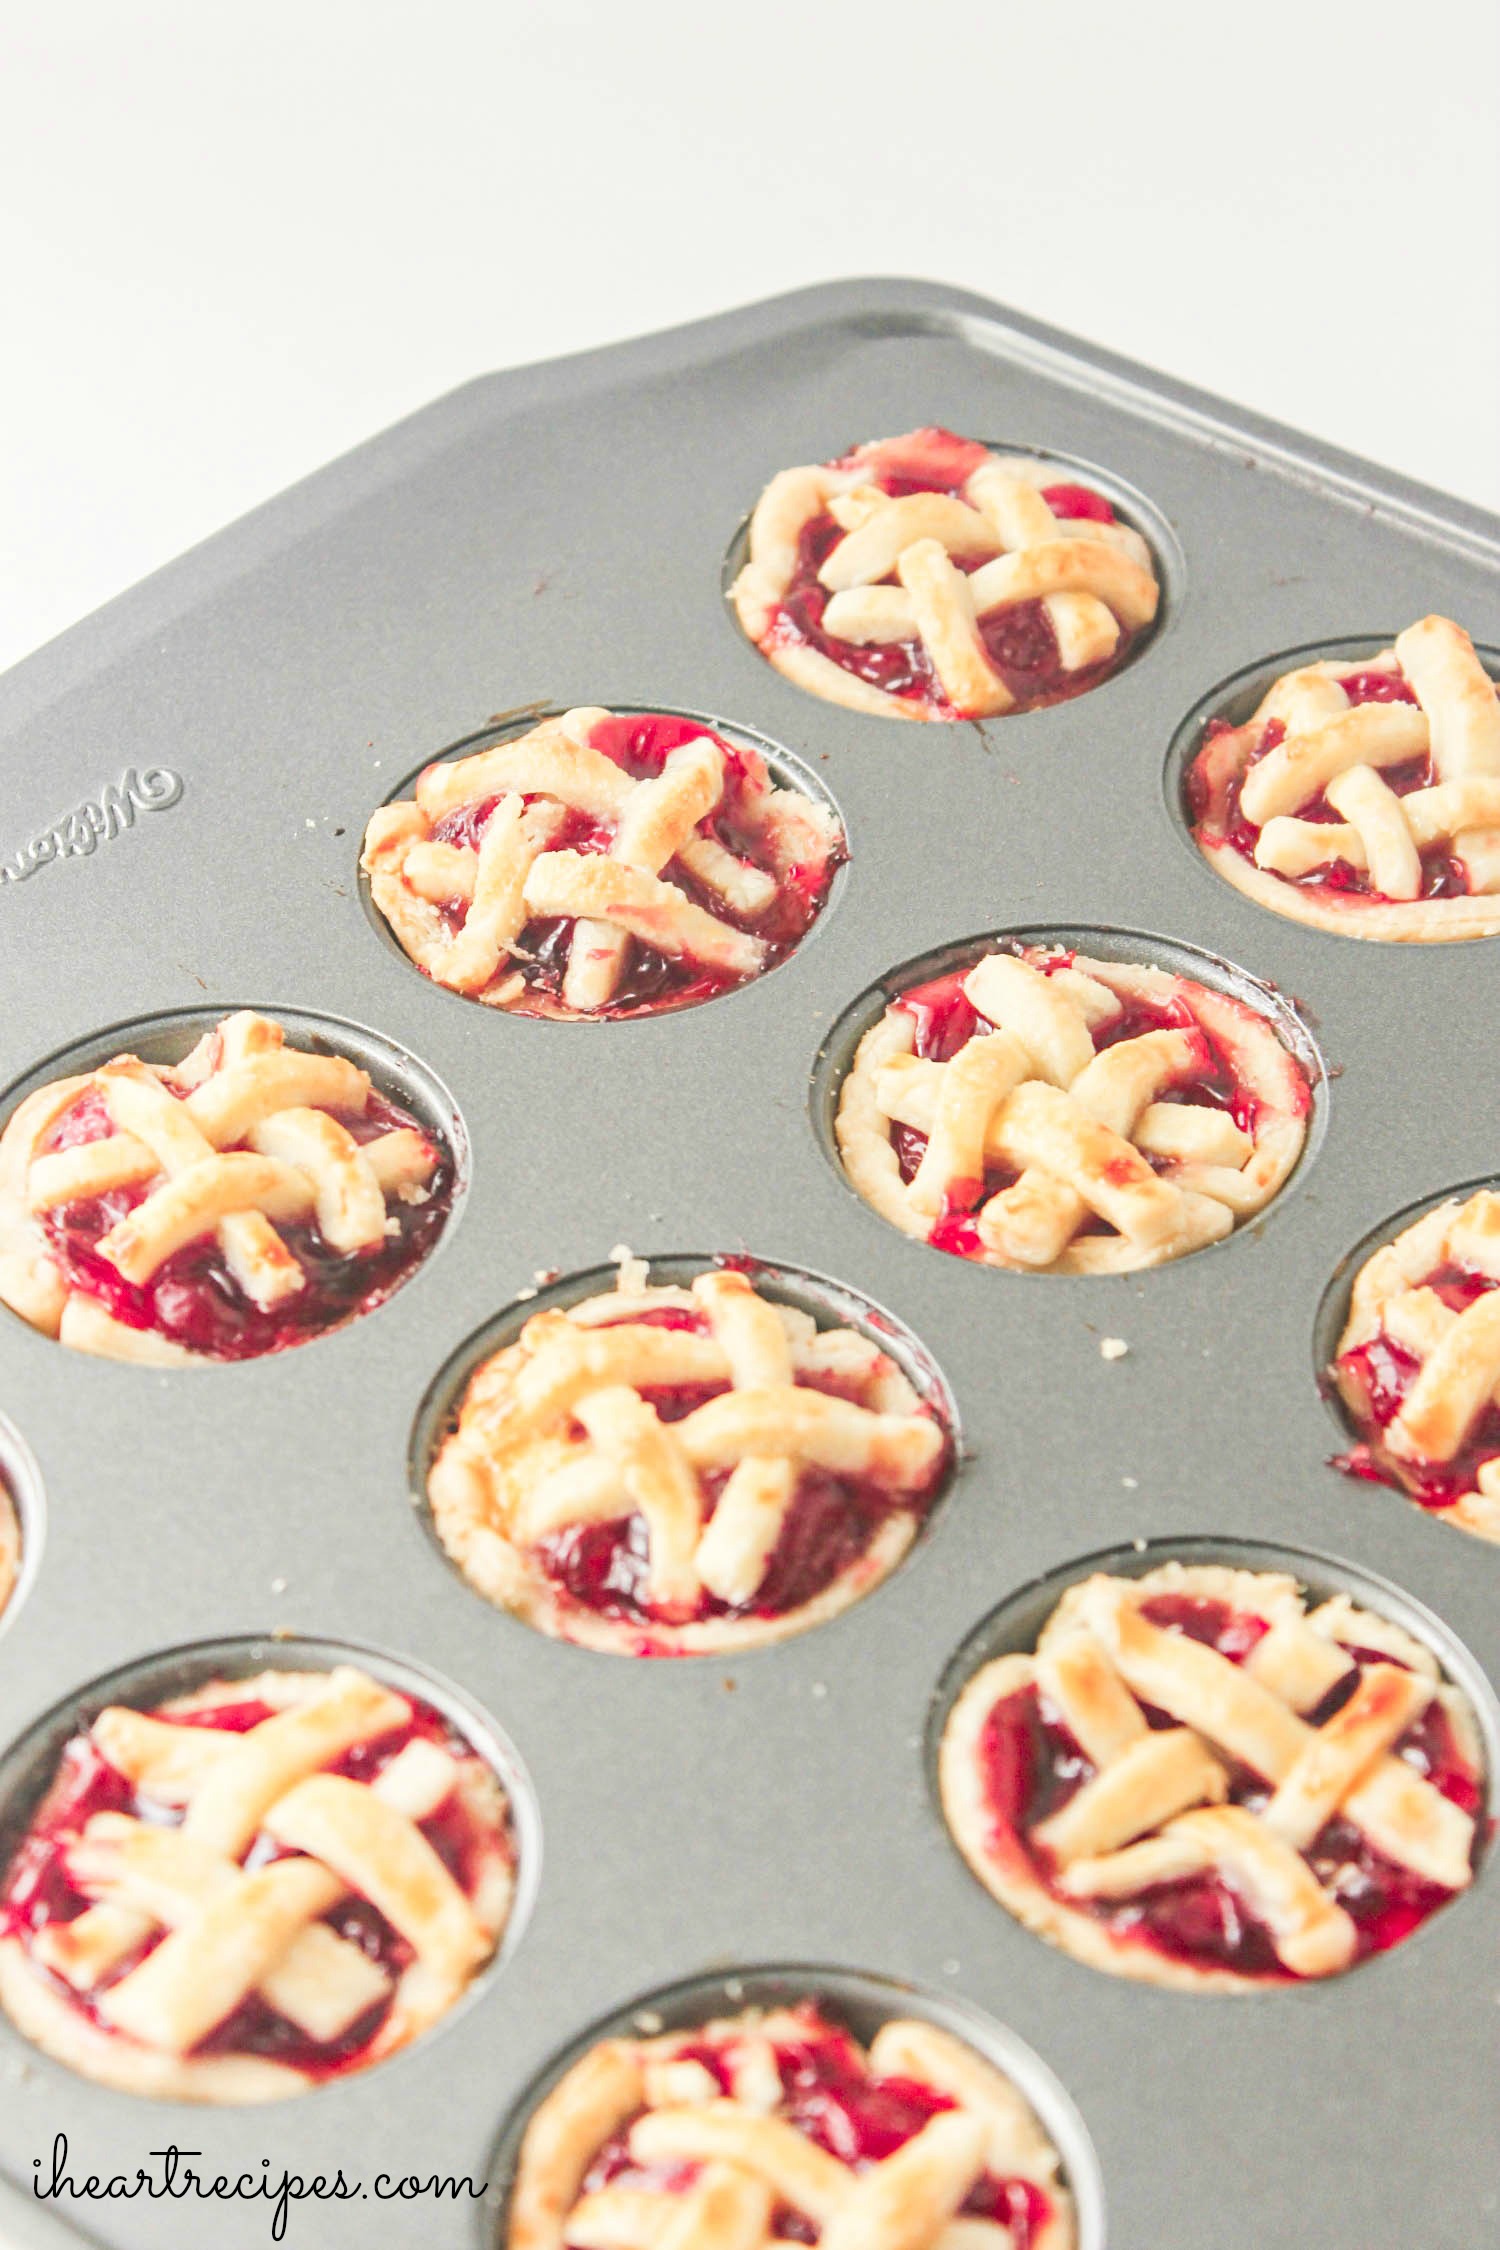 Mini Cherry Pie Bites baked to perfection in a muffin tin. This recipe only requires a few simple ingredients.